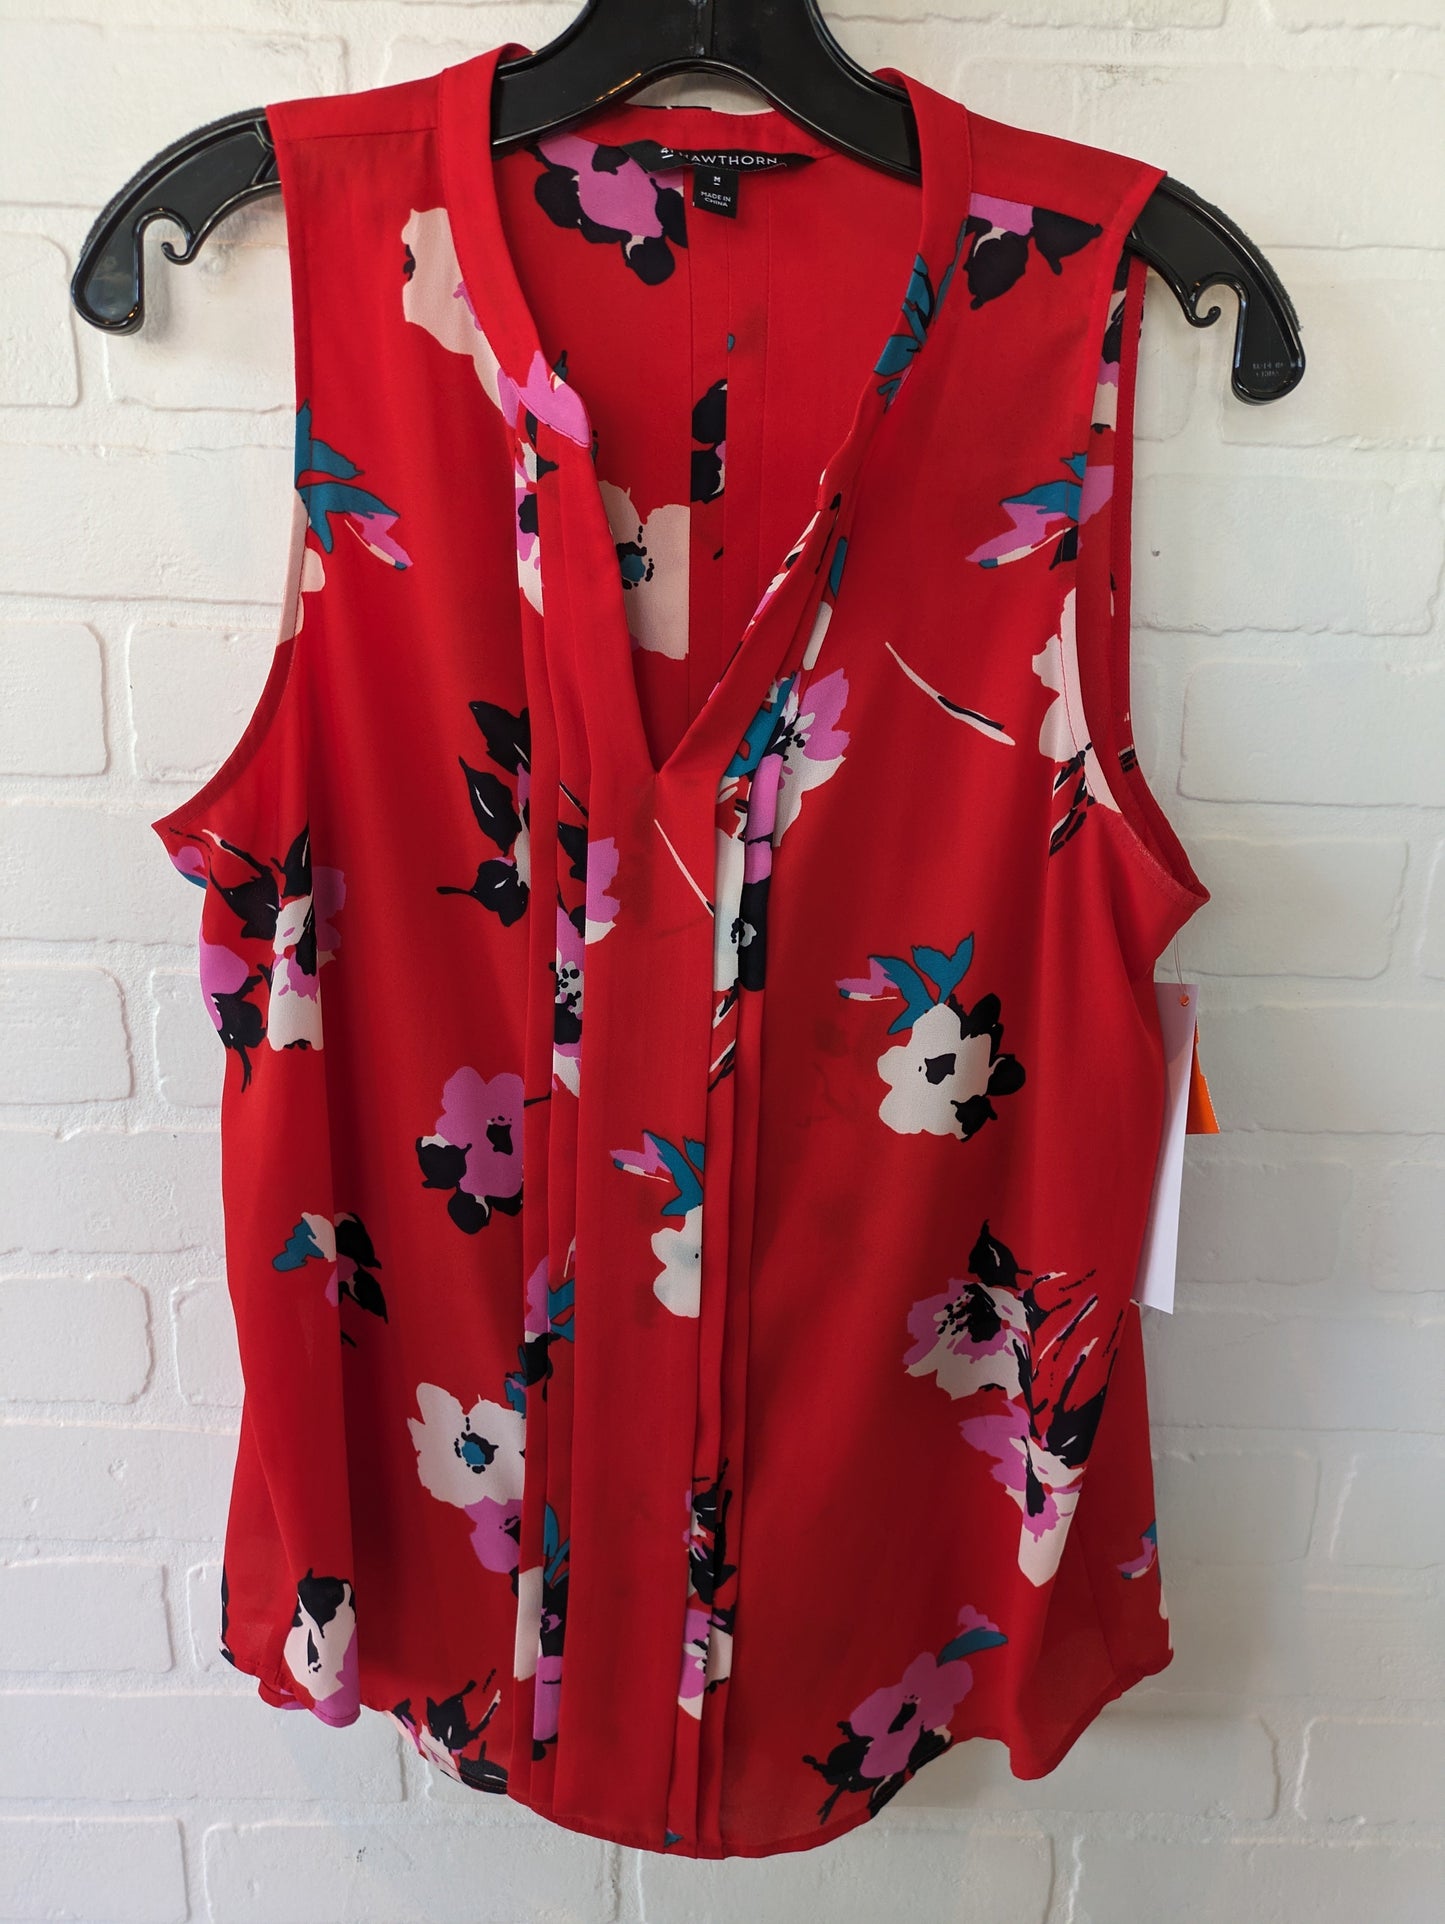 Red Top Sleeveless 41 Hawthorn, Size M